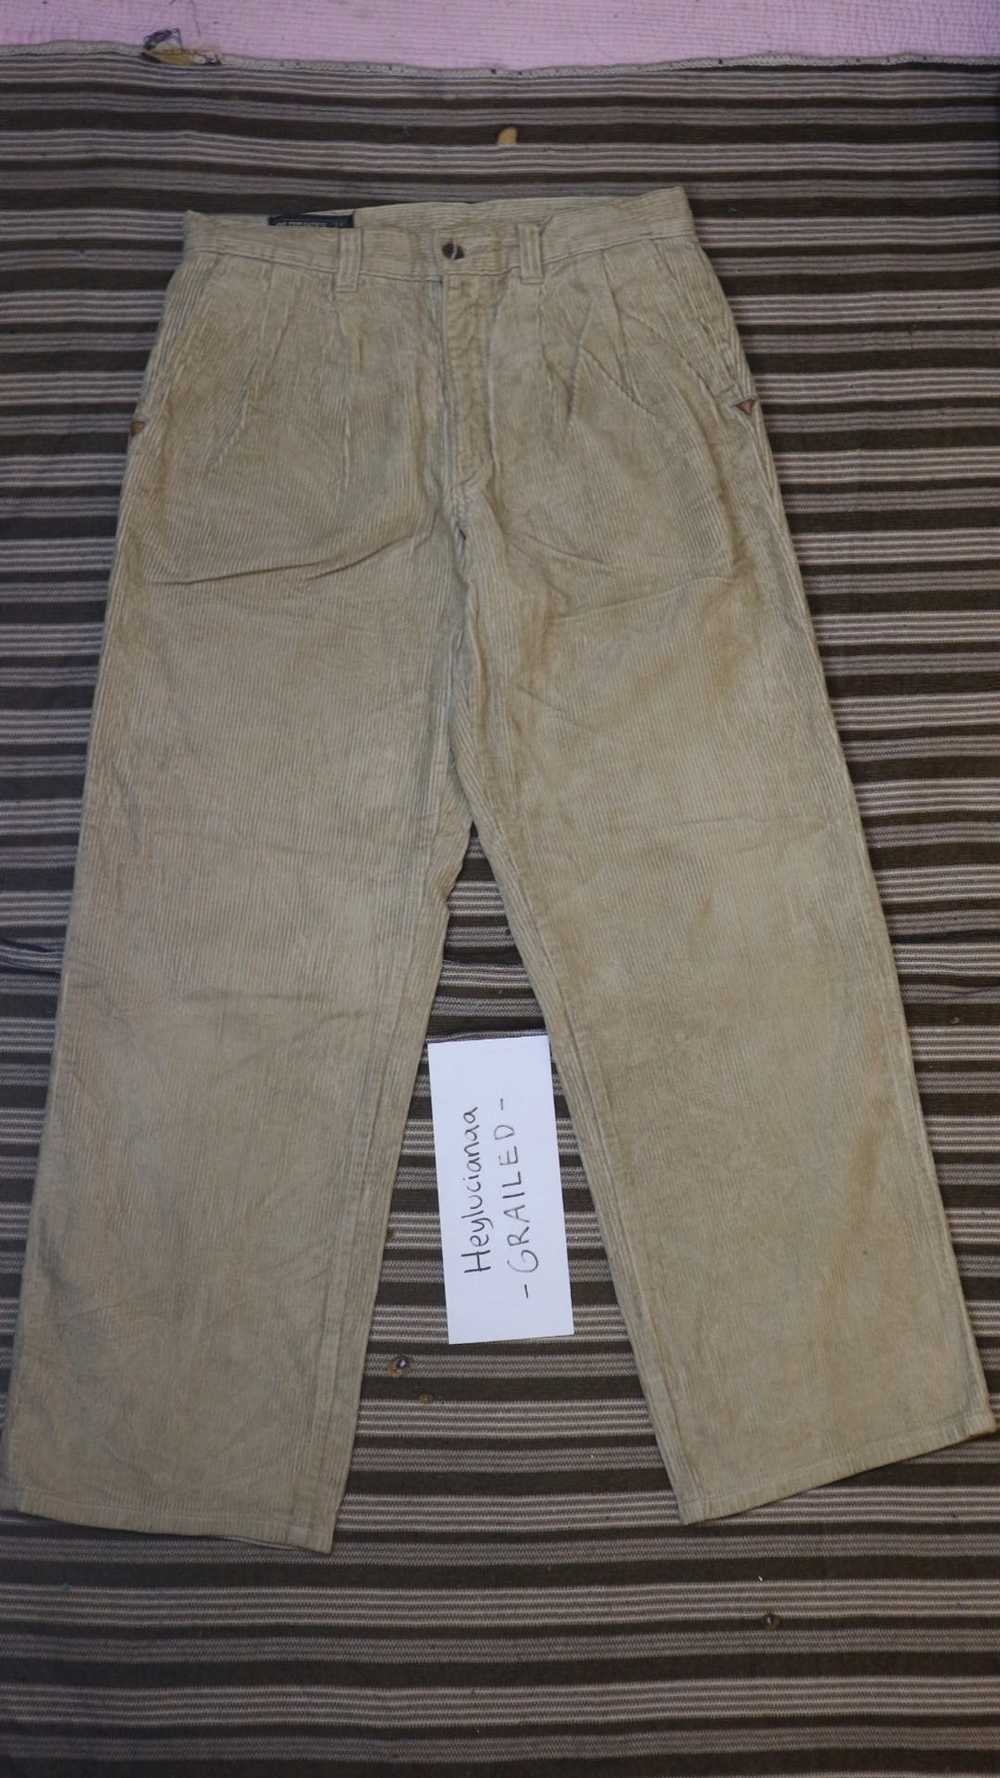 Japanese Brand Corduroy Pant by Blue Way - image 1